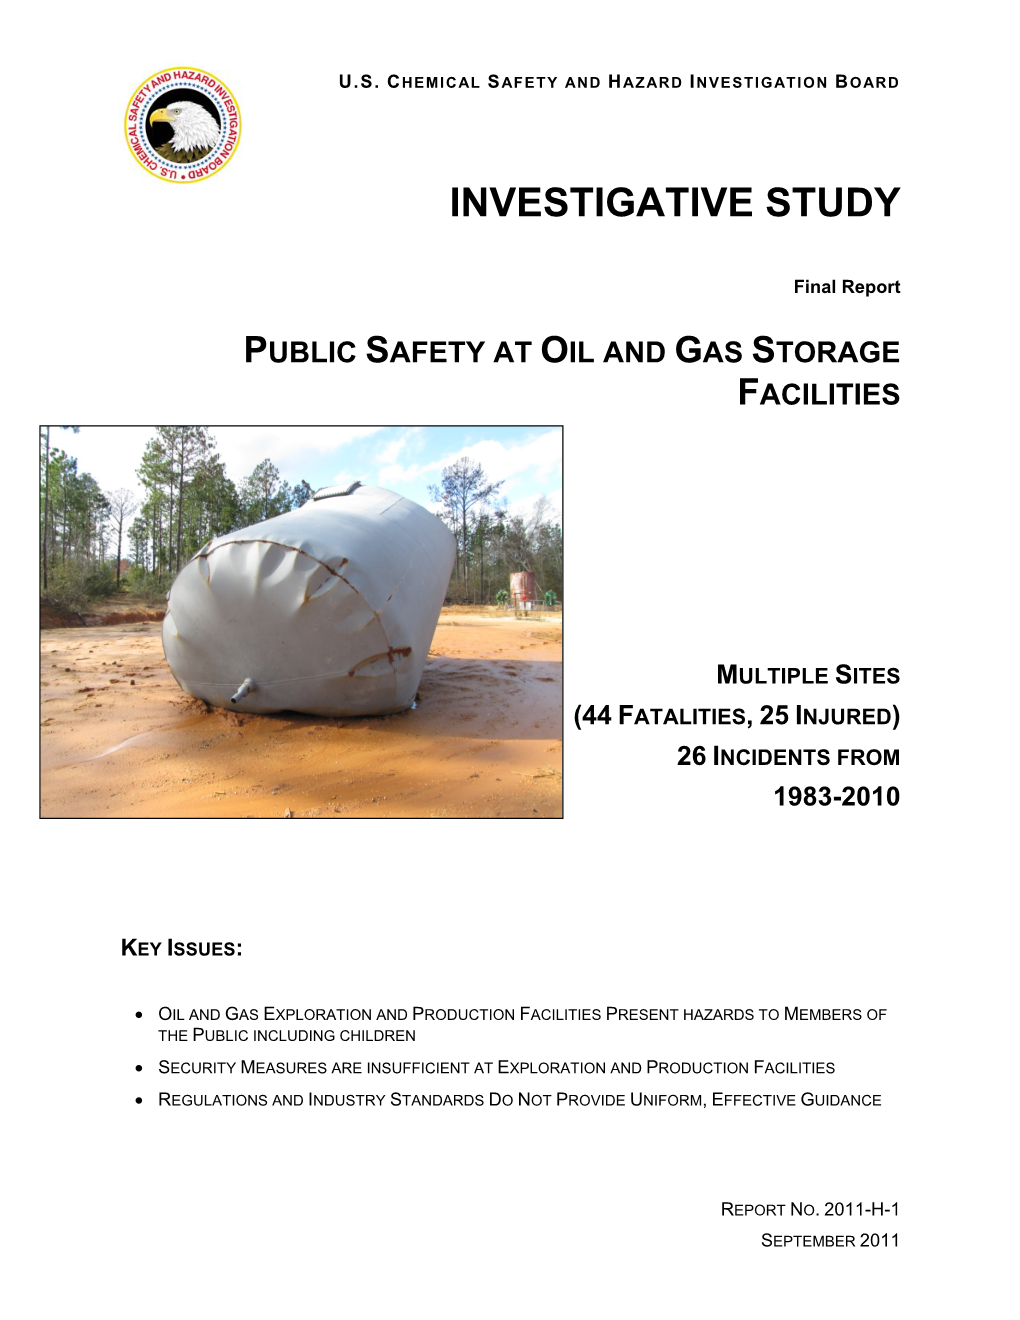 Public Safety and Oil and Gas Storage Facilities